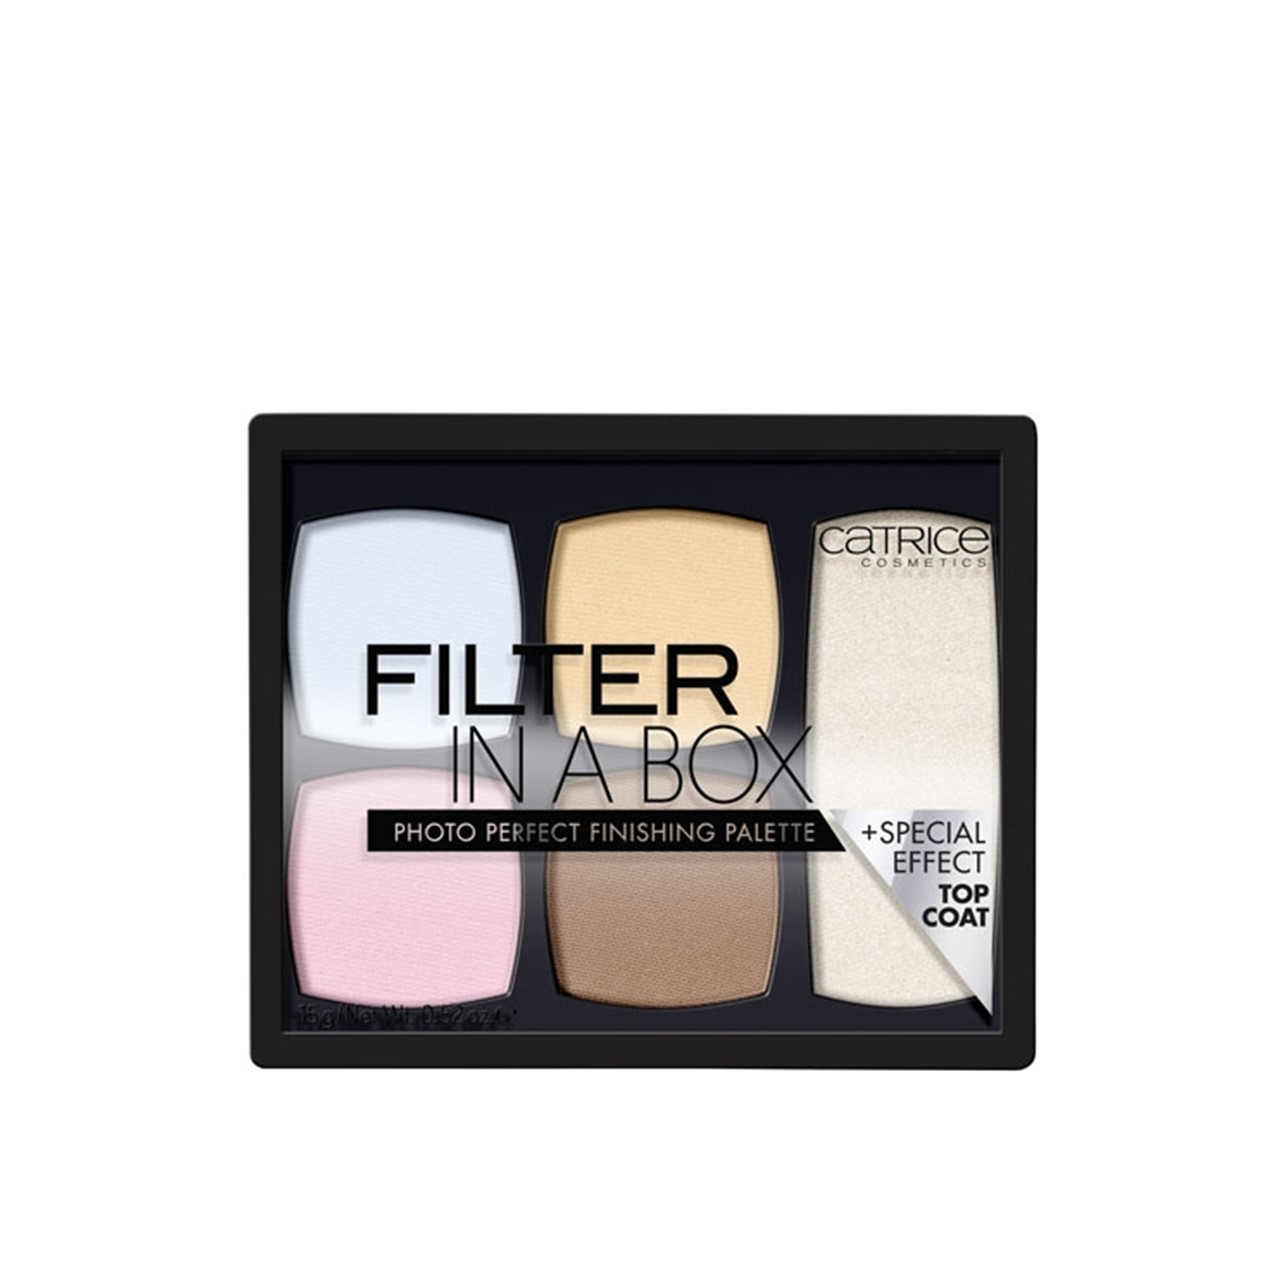 Catrice Filter In A Box Photo Perfect Finishing Palette 010 15g (0.53oz)